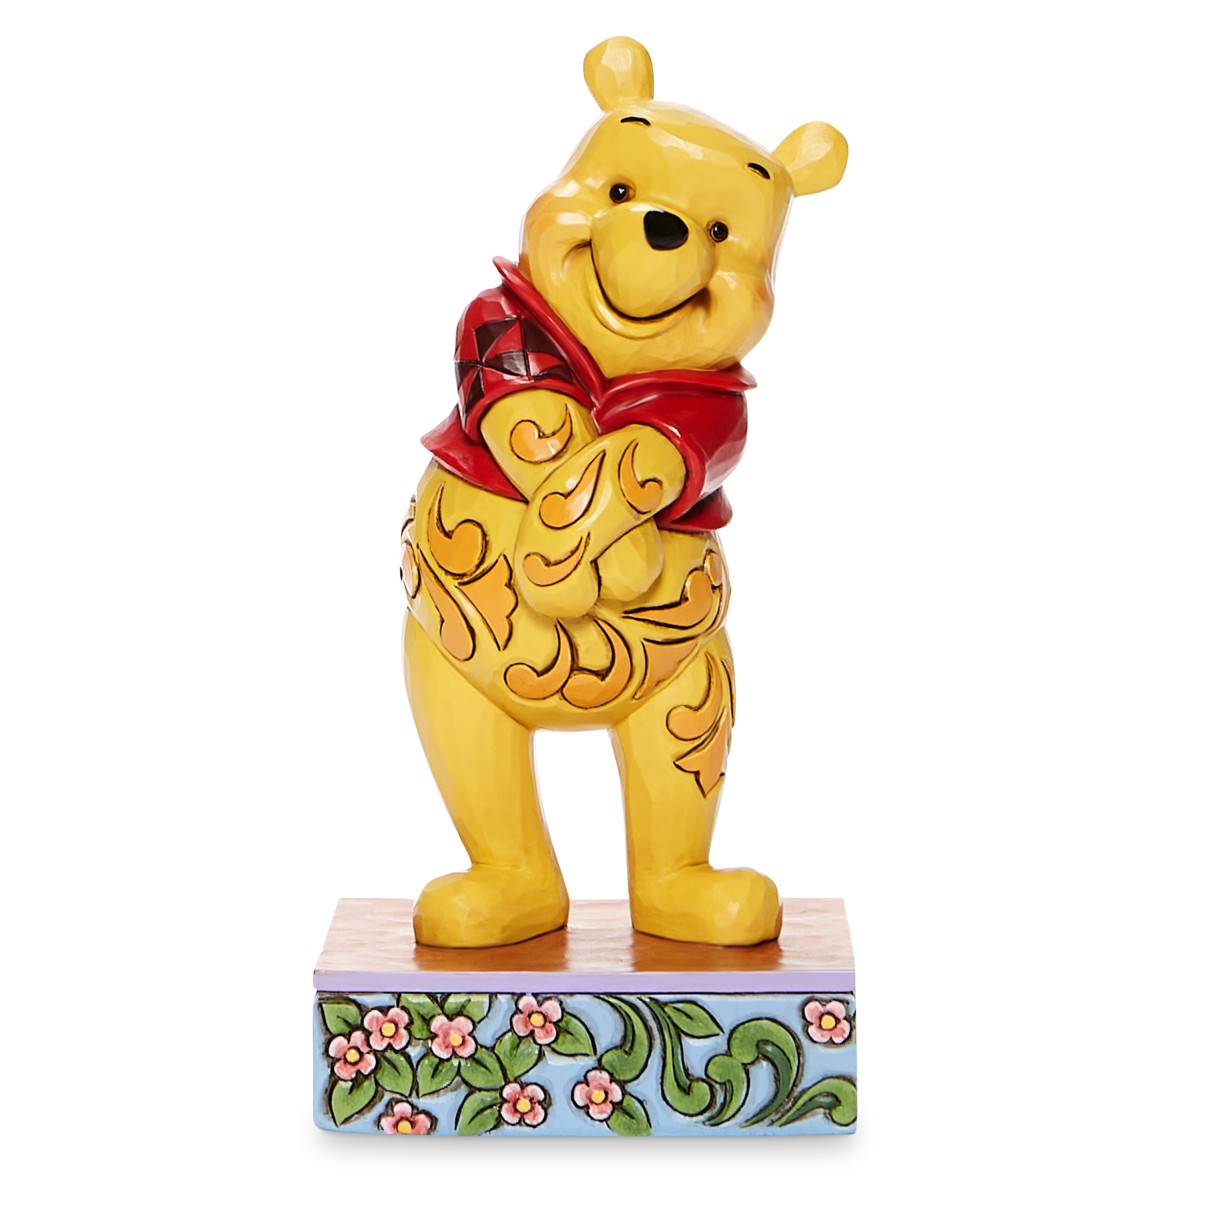 Winnie the Pooh ''Silly Ol' Bear'' Figure by Jim Shore